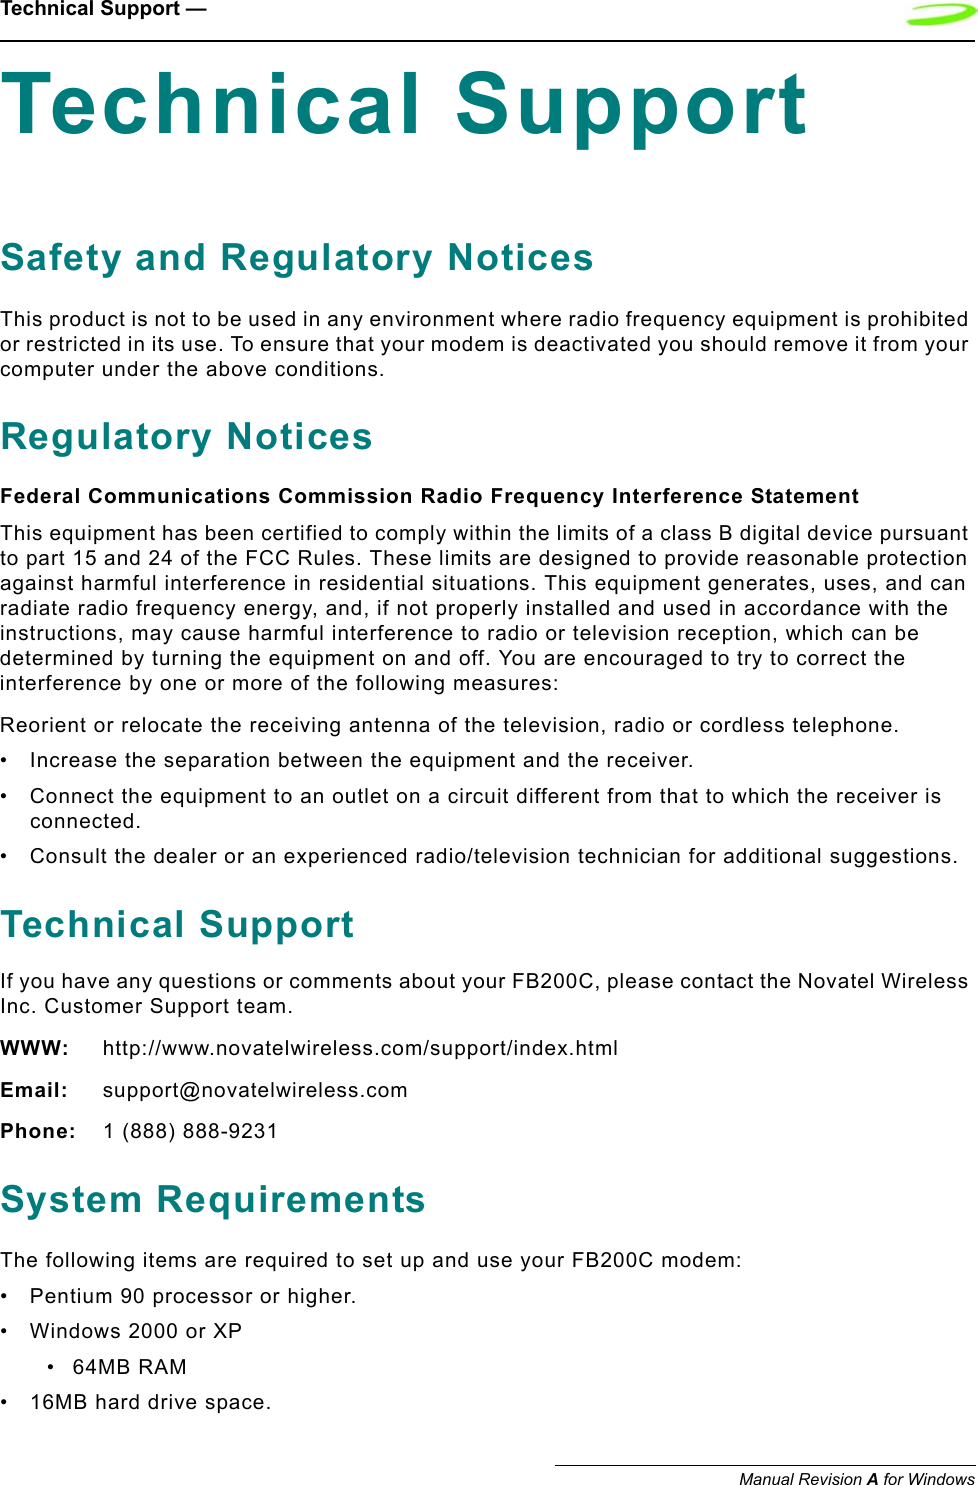 Technical Support — Manual Revision A for WindowsTechnical SupportSafety and Regulatory NoticesThis product is not to be used in any environment where radio frequency equipment is prohibited or restricted in its use. To ensure that your modem is deactivated you should remove it from your computer under the above conditions.Regulatory NoticesFederal Communications Commission Radio Frequency Interference StatementThis equipment has been certified to comply within the limits of a class B digital device pursuant to part 15 and 24 of the FCC Rules. These limits are designed to provide reasonable protection against harmful interference in residential situations. This equipment generates, uses, and can radiate radio frequency energy, and, if not properly installed and used in accordance with the instructions, may cause harmful interference to radio or television reception, which can be determined by turning the equipment on and off. You are encouraged to try to correct the interference by one or more of the following measures:Reorient or relocate the receiving antenna of the television, radio or cordless telephone.• Increase the separation between the equipment and the receiver.• Connect the equipment to an outlet on a circuit different from that to which the receiver is connected.• Consult the dealer or an experienced radio/television technician for additional suggestions.Technical SupportIf you have any questions or comments about your FB200C, please contact the Novatel Wireless Inc. Customer Support team.WWW: http://www.novatelwireless.com/support/index.htmlEmail: support@novatelwireless.comPhone: 1 (888) 888-9231System RequirementsThe following items are required to set up and use your FB200C modem:• Pentium 90 processor or higher.• Windows 2000 or XP•64MB RAM• 16MB hard drive space.